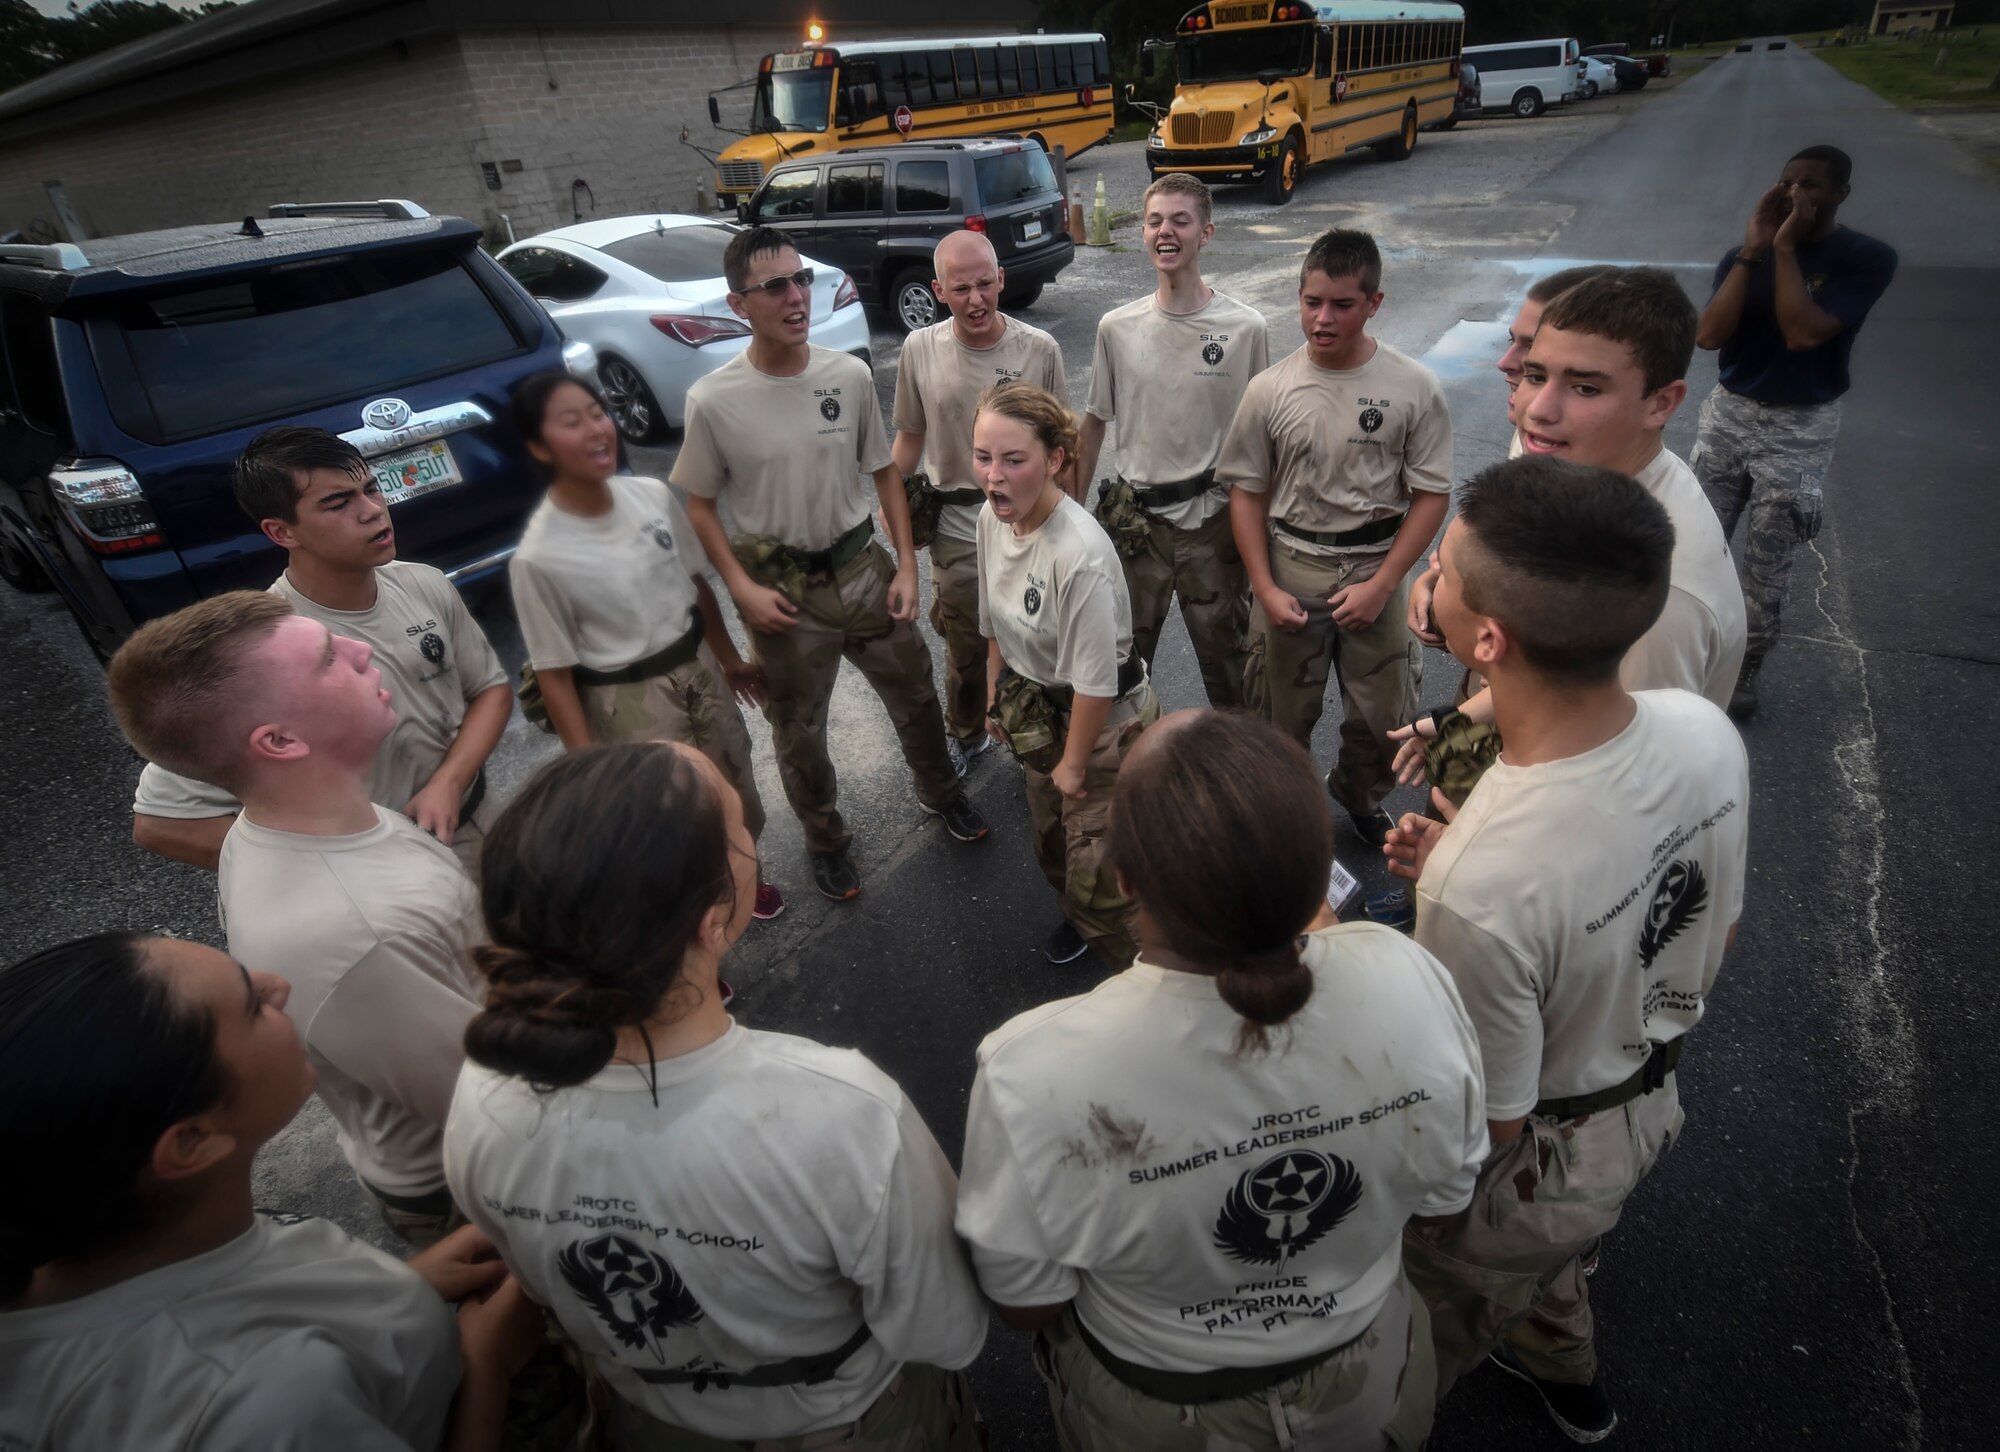 A Junior ROTC cadet motivates her team during a Monster Mash for Summer Leadership School at Hurlburt Field, Fla., June 30, 2017. Special Tactics Airmen partnered with more than 50 cadets from five local high schools for a week-long Summer Leadership Course to learn about leadership, teamwork, and self-confidence. (U.S. Air Force photo by Senior Airman Ryan Conroy) 